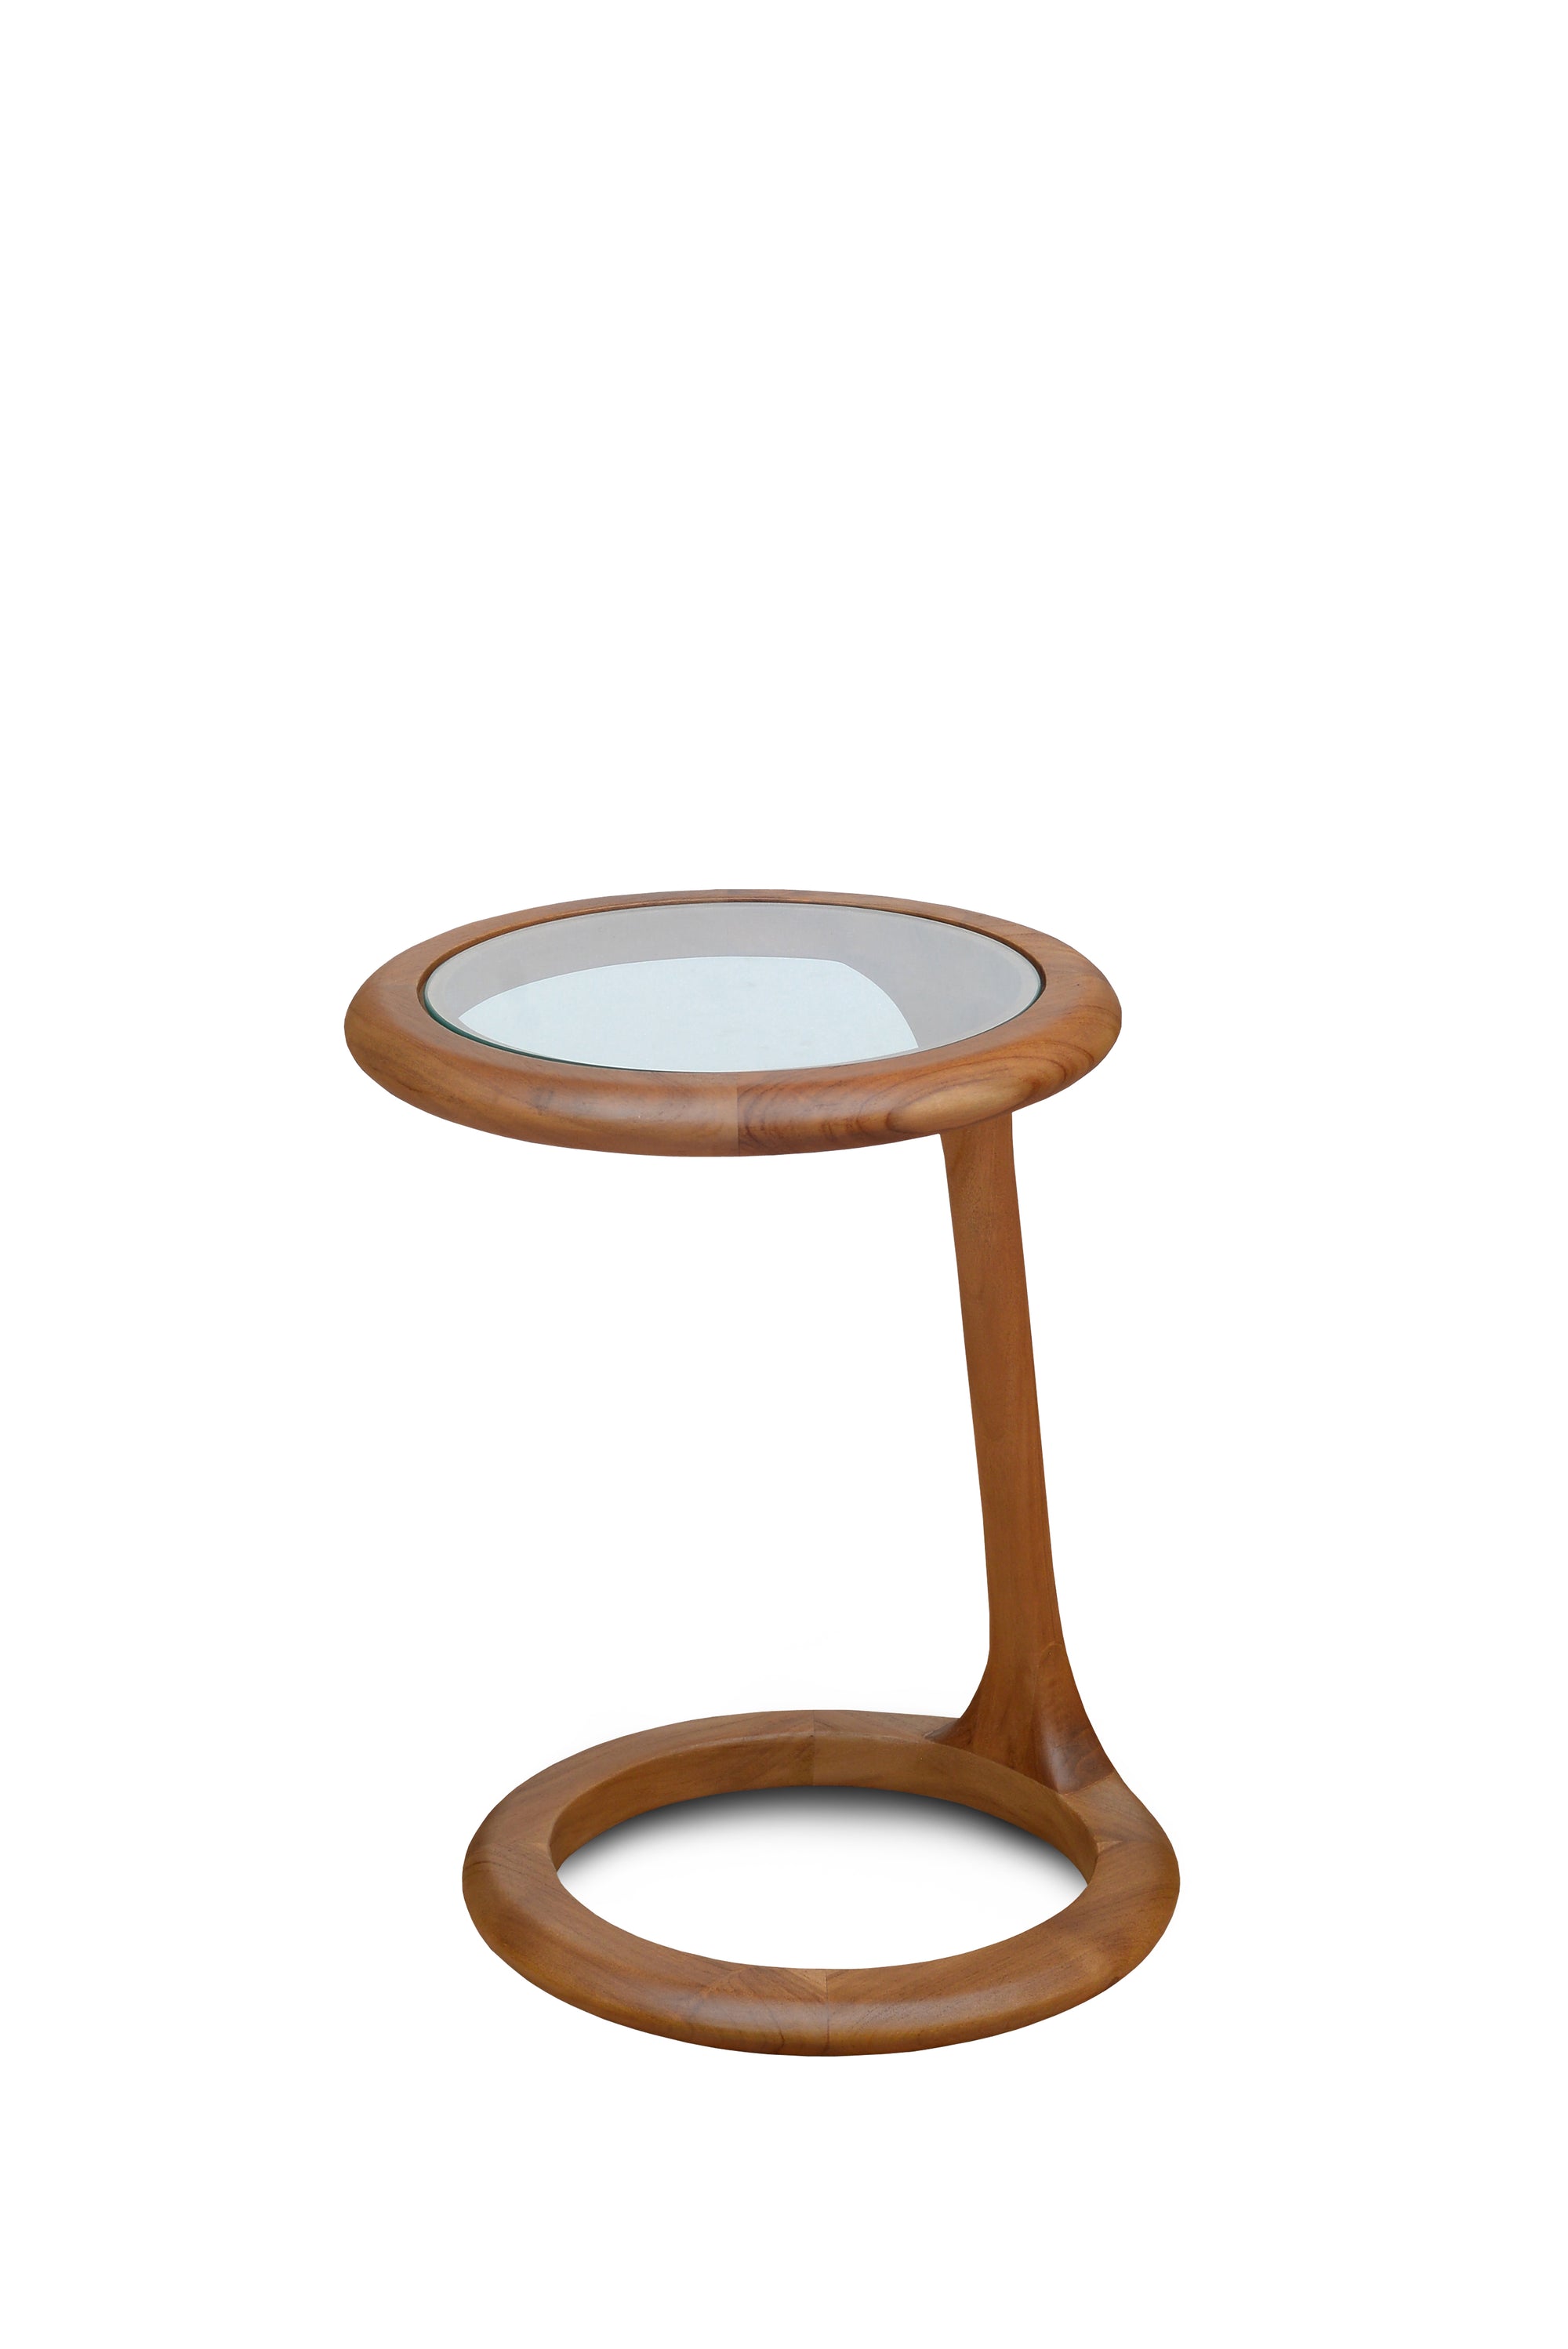 Nido Low Table Teak with Glass Top in Natural Finish